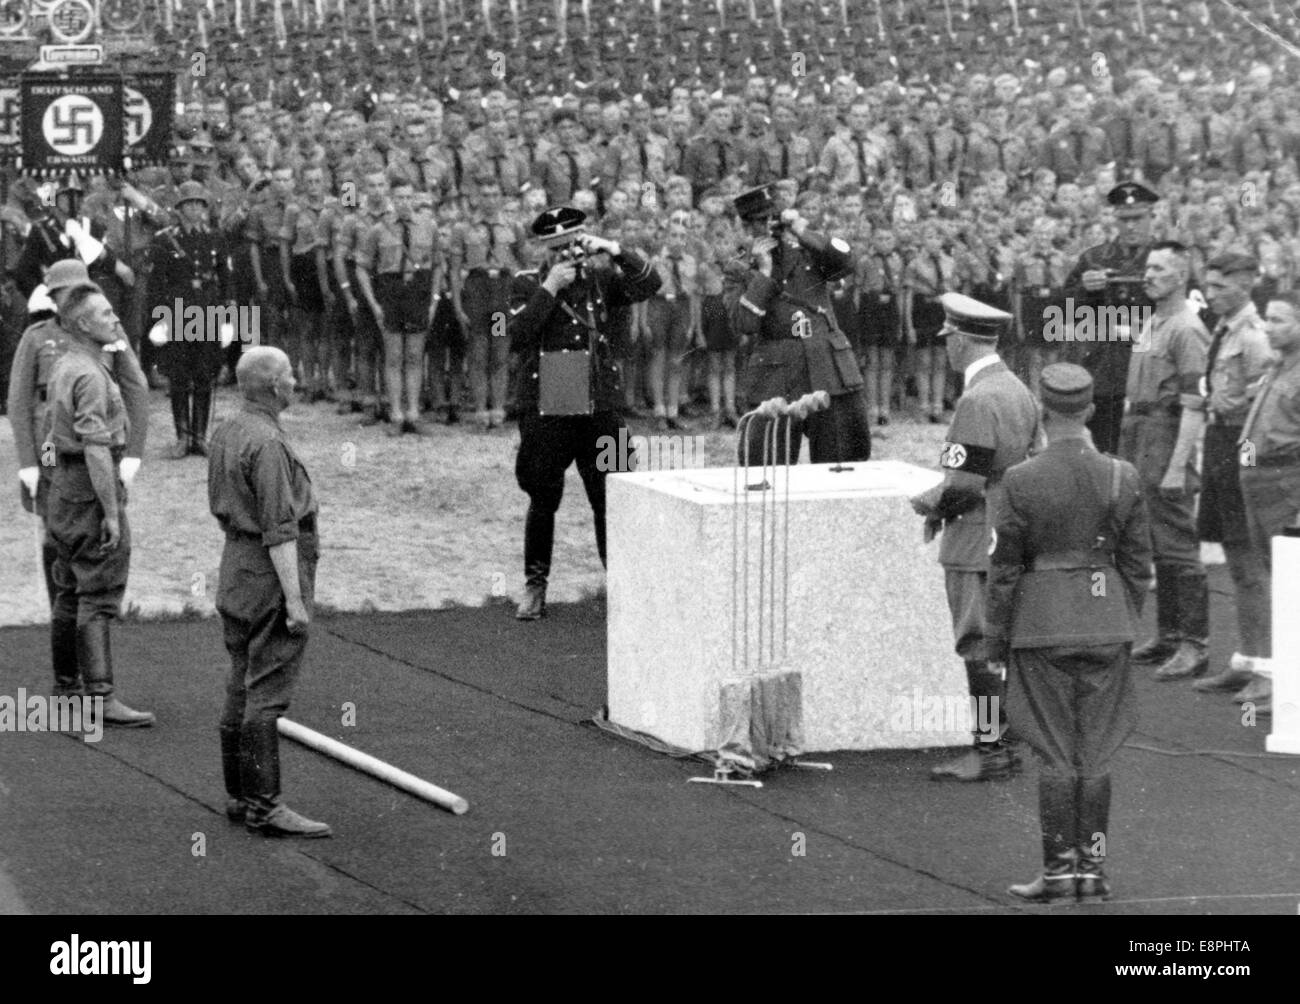 Nuremberg Rally 1937 in Nuremberg, Germany - Laying of the foundation stone for the German stadium on the Nazi party rally grounds on 09 September 1937 in the presence of Adolf Hitler. Flaws in quality due to the historic picture copy) Fotoarchiv für Zeitgeschichtee - NO WIRE SERVICE - Stock Photo